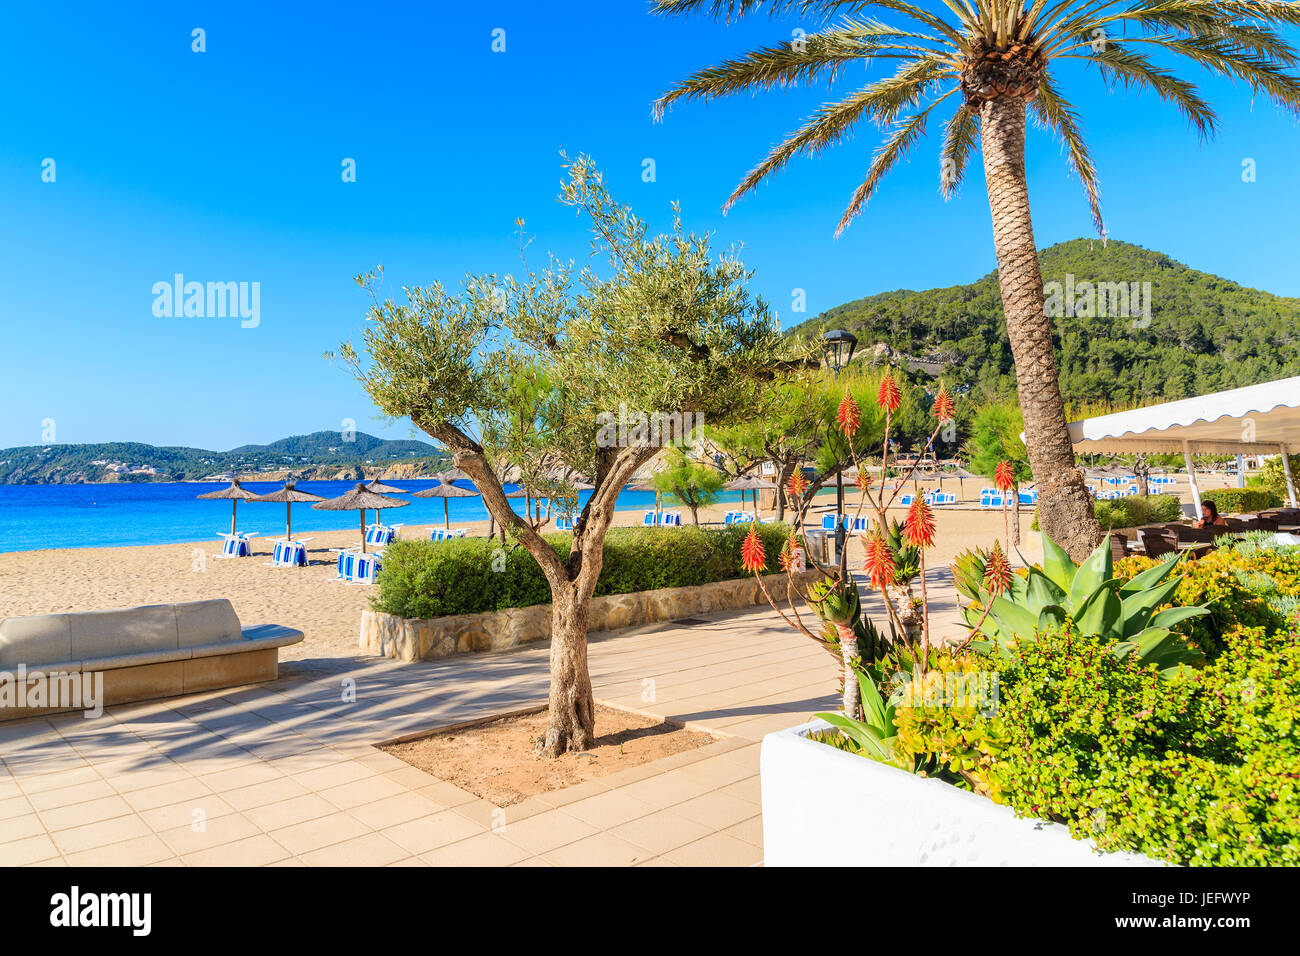 CALA SAN VICENTE BAY, IBIZA ISLAND - MAY 19, 2017: Tropical folwers and palm tree on coastal promenade along sandy beach with umbrellas and sunbeds in Stock Photo